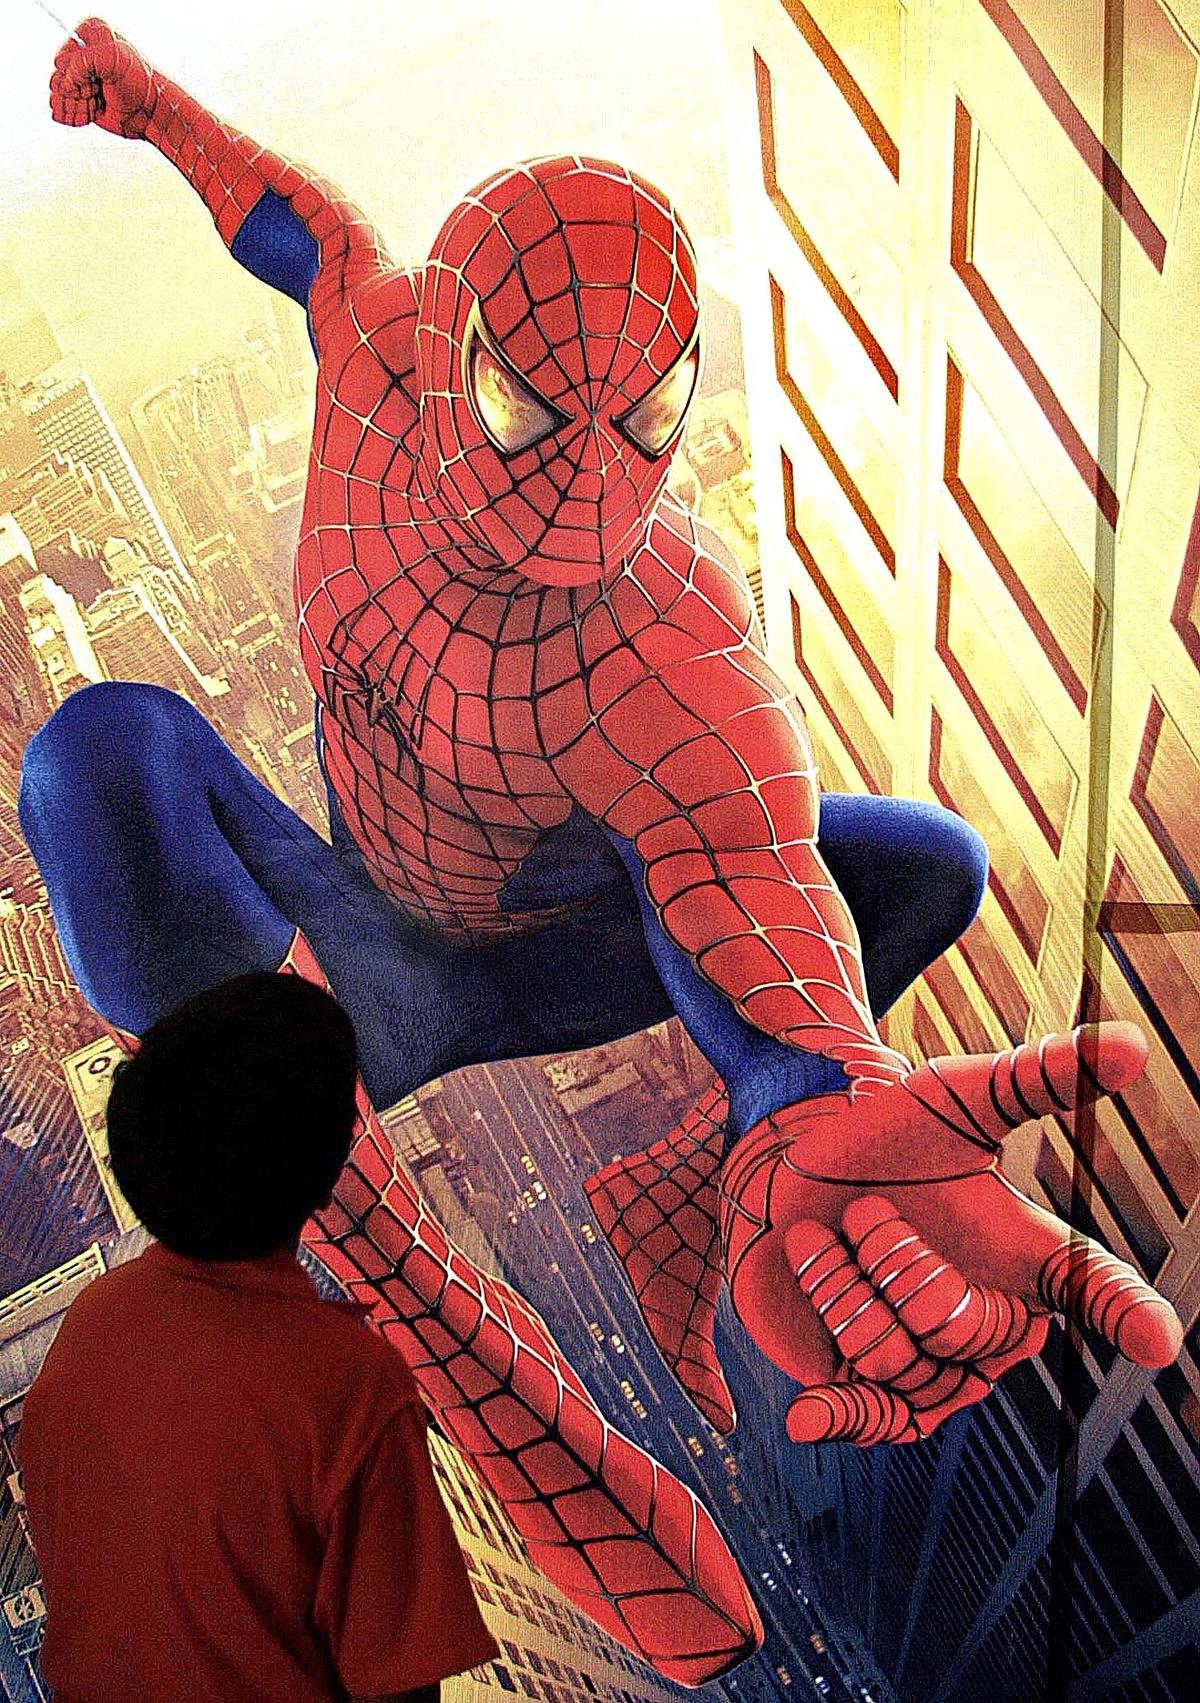 A boy looks at a poster of the movie "Spiderman" at a theatre in Bombay, May 24, 2002. (AFP/AFP via Getty Images)